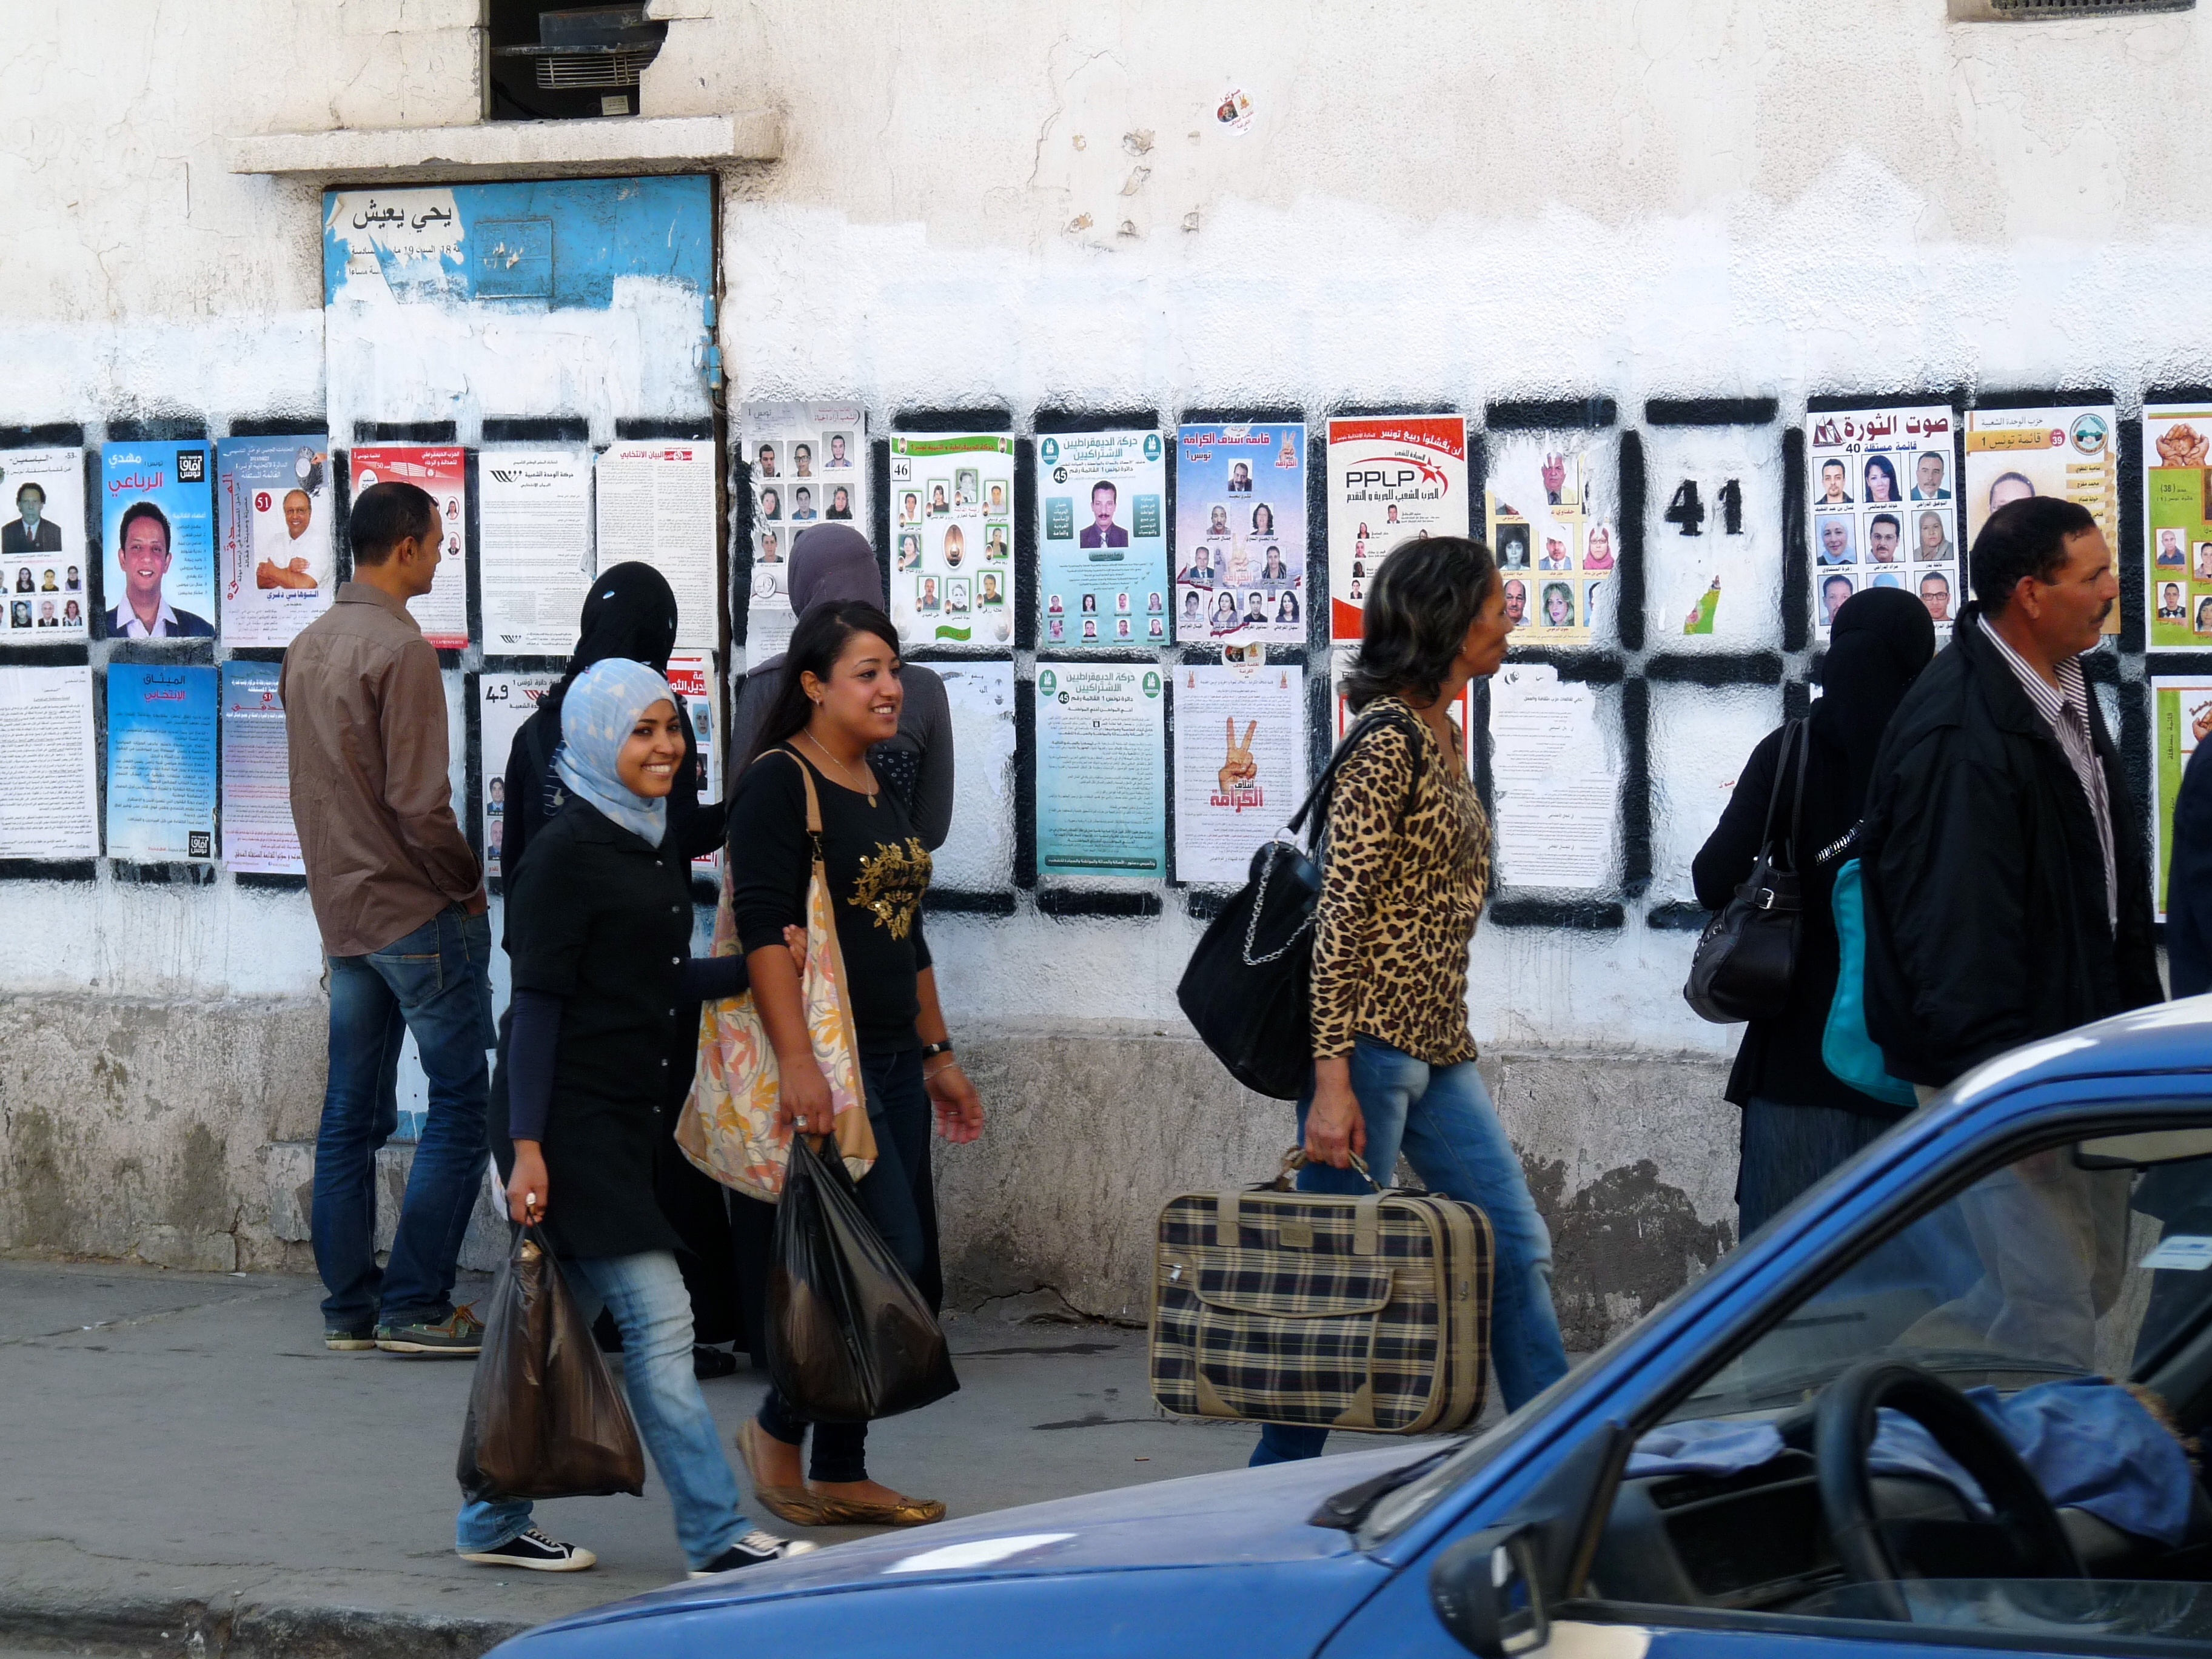 Young people at election time in Tunisia. Credit: Stefan de Vries